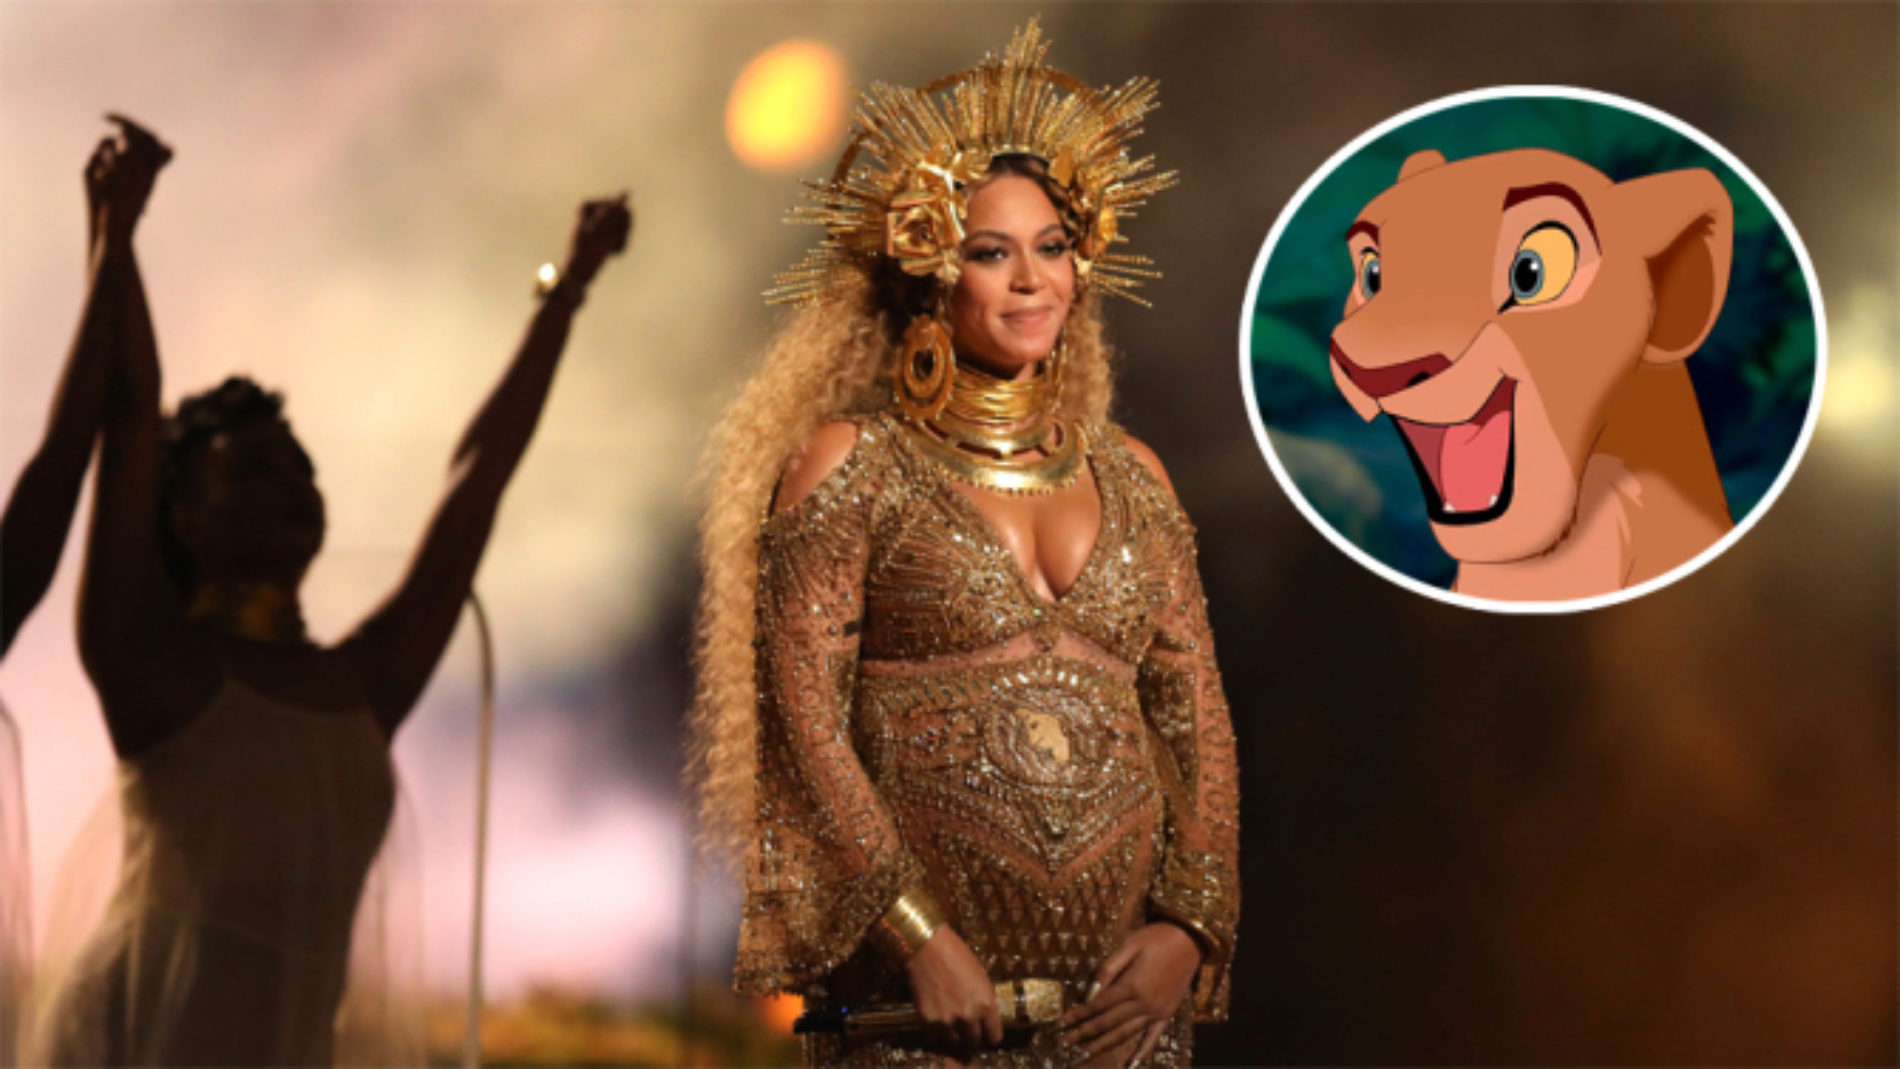 Beyoncé considered for a key role in Disney’s Lion King remake